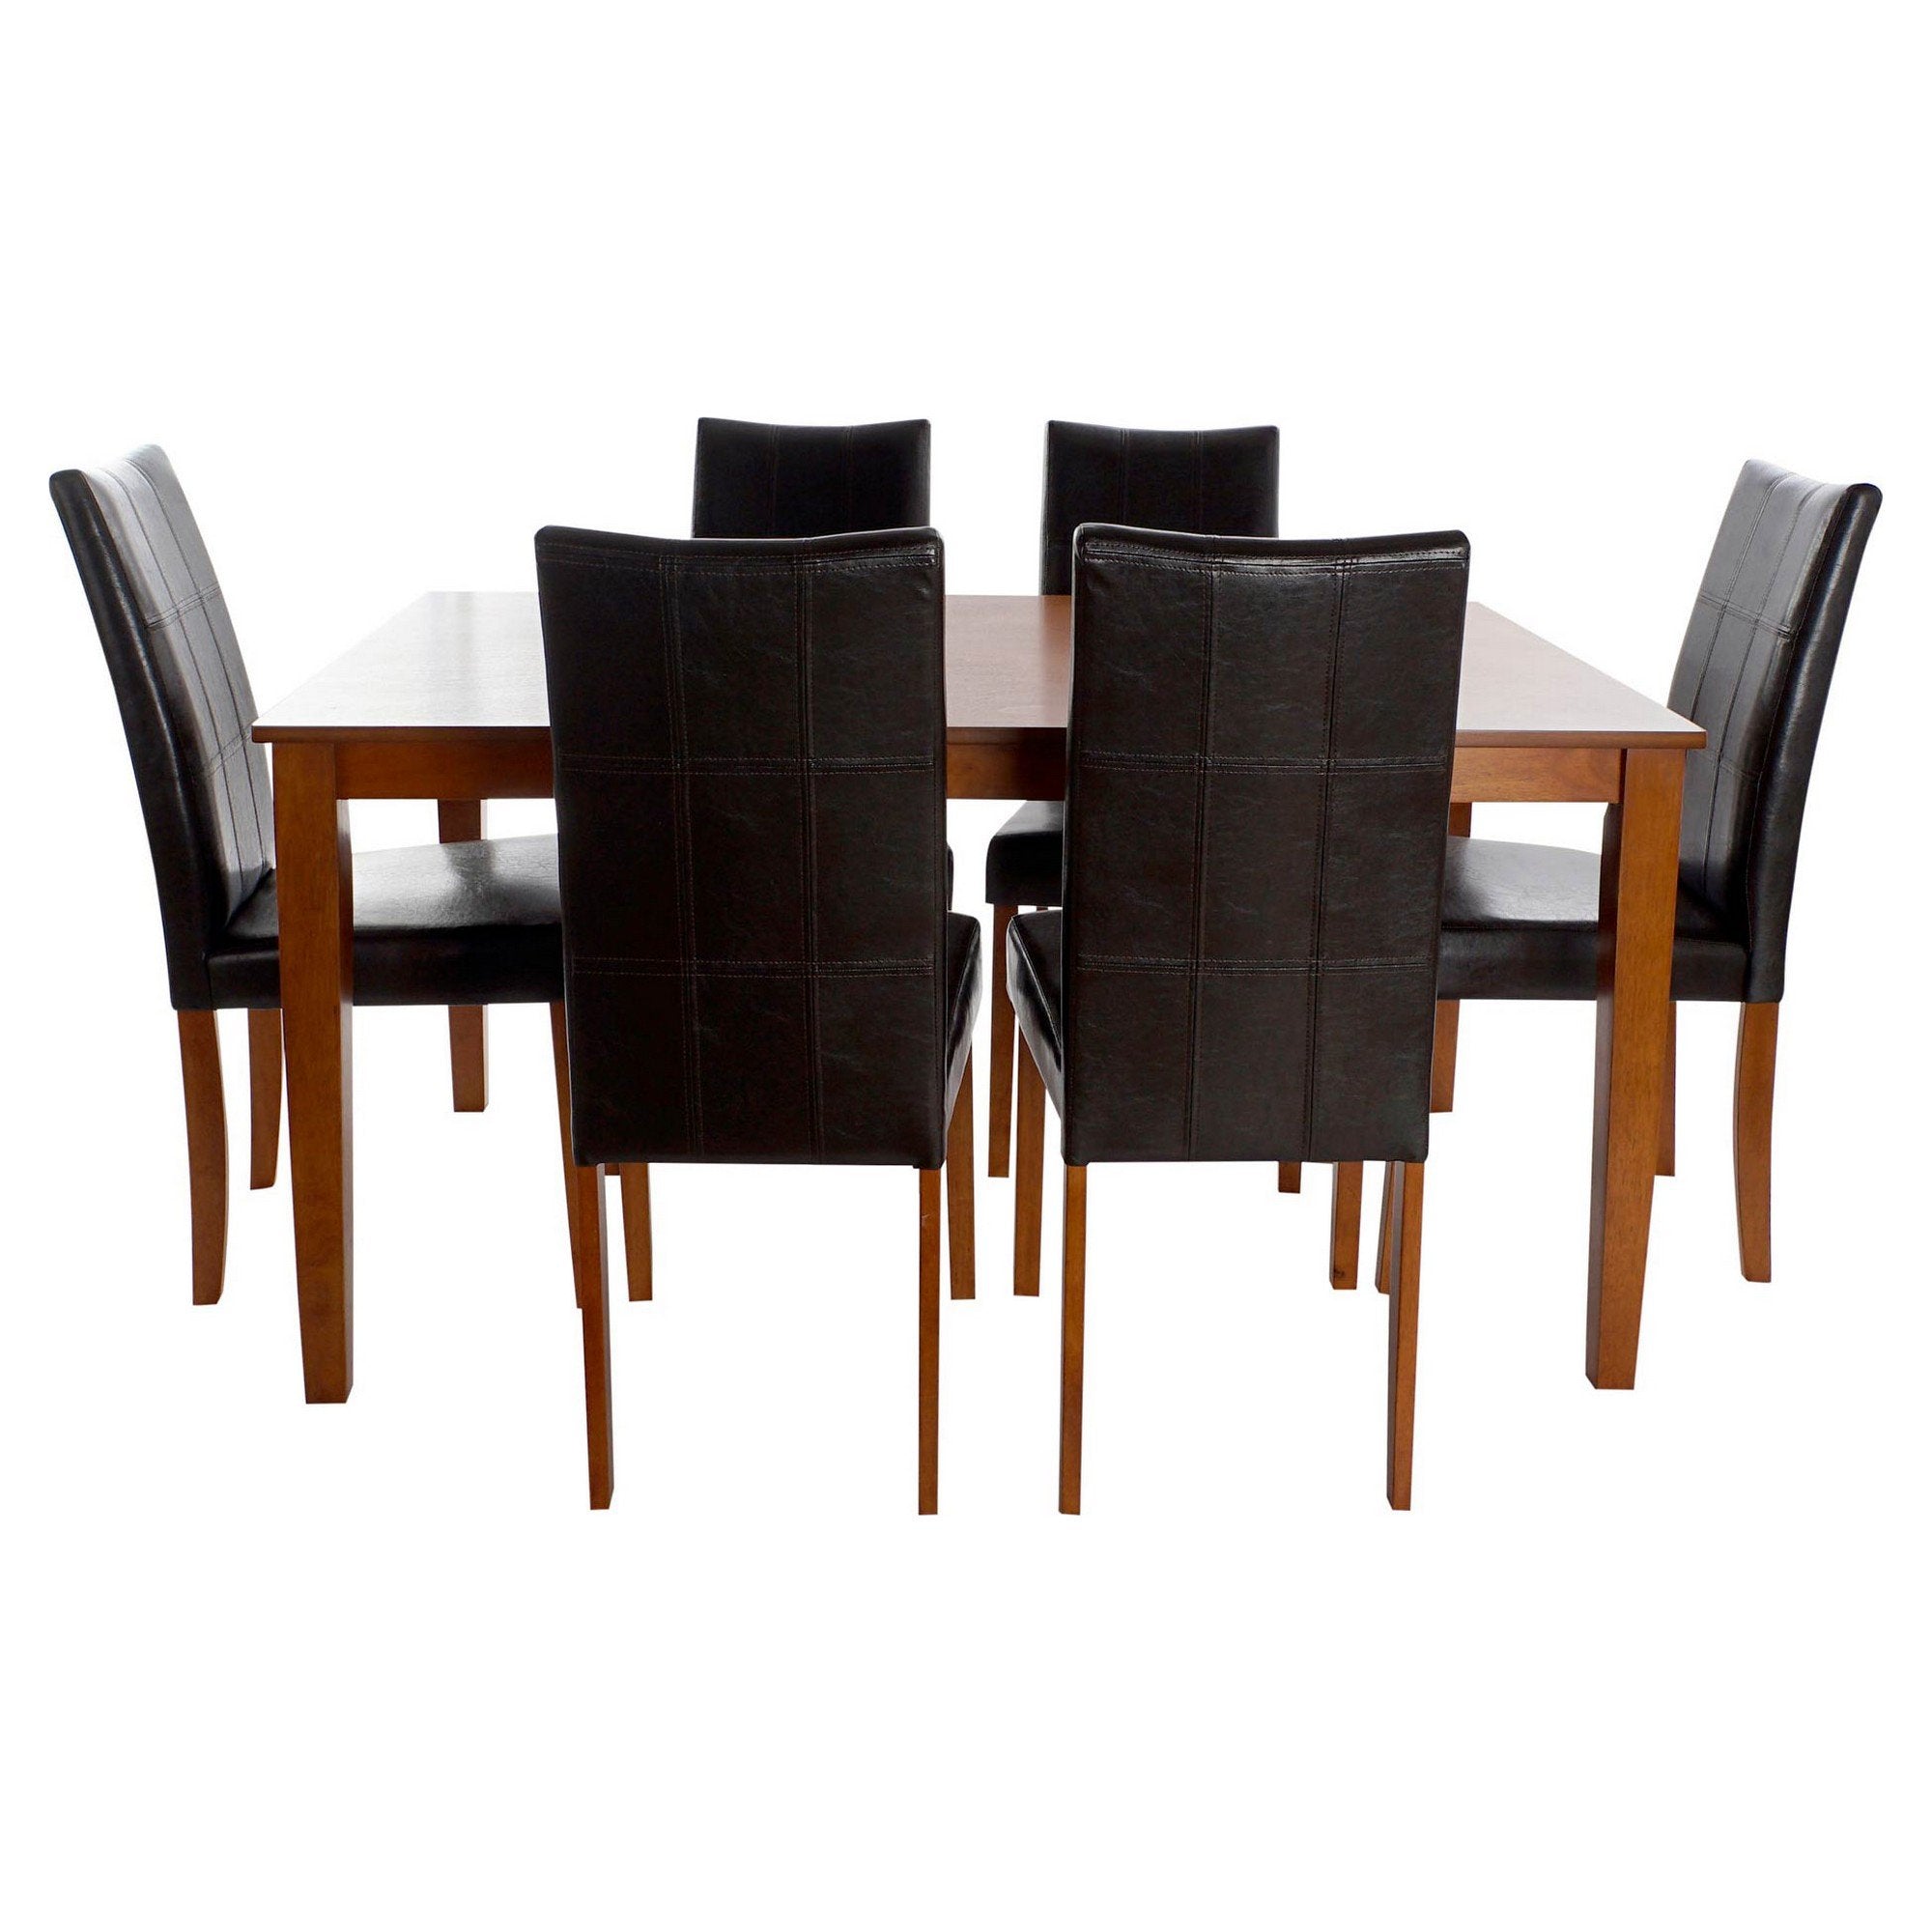 Table and 6 chairs from the Oak collection (7 pieces)